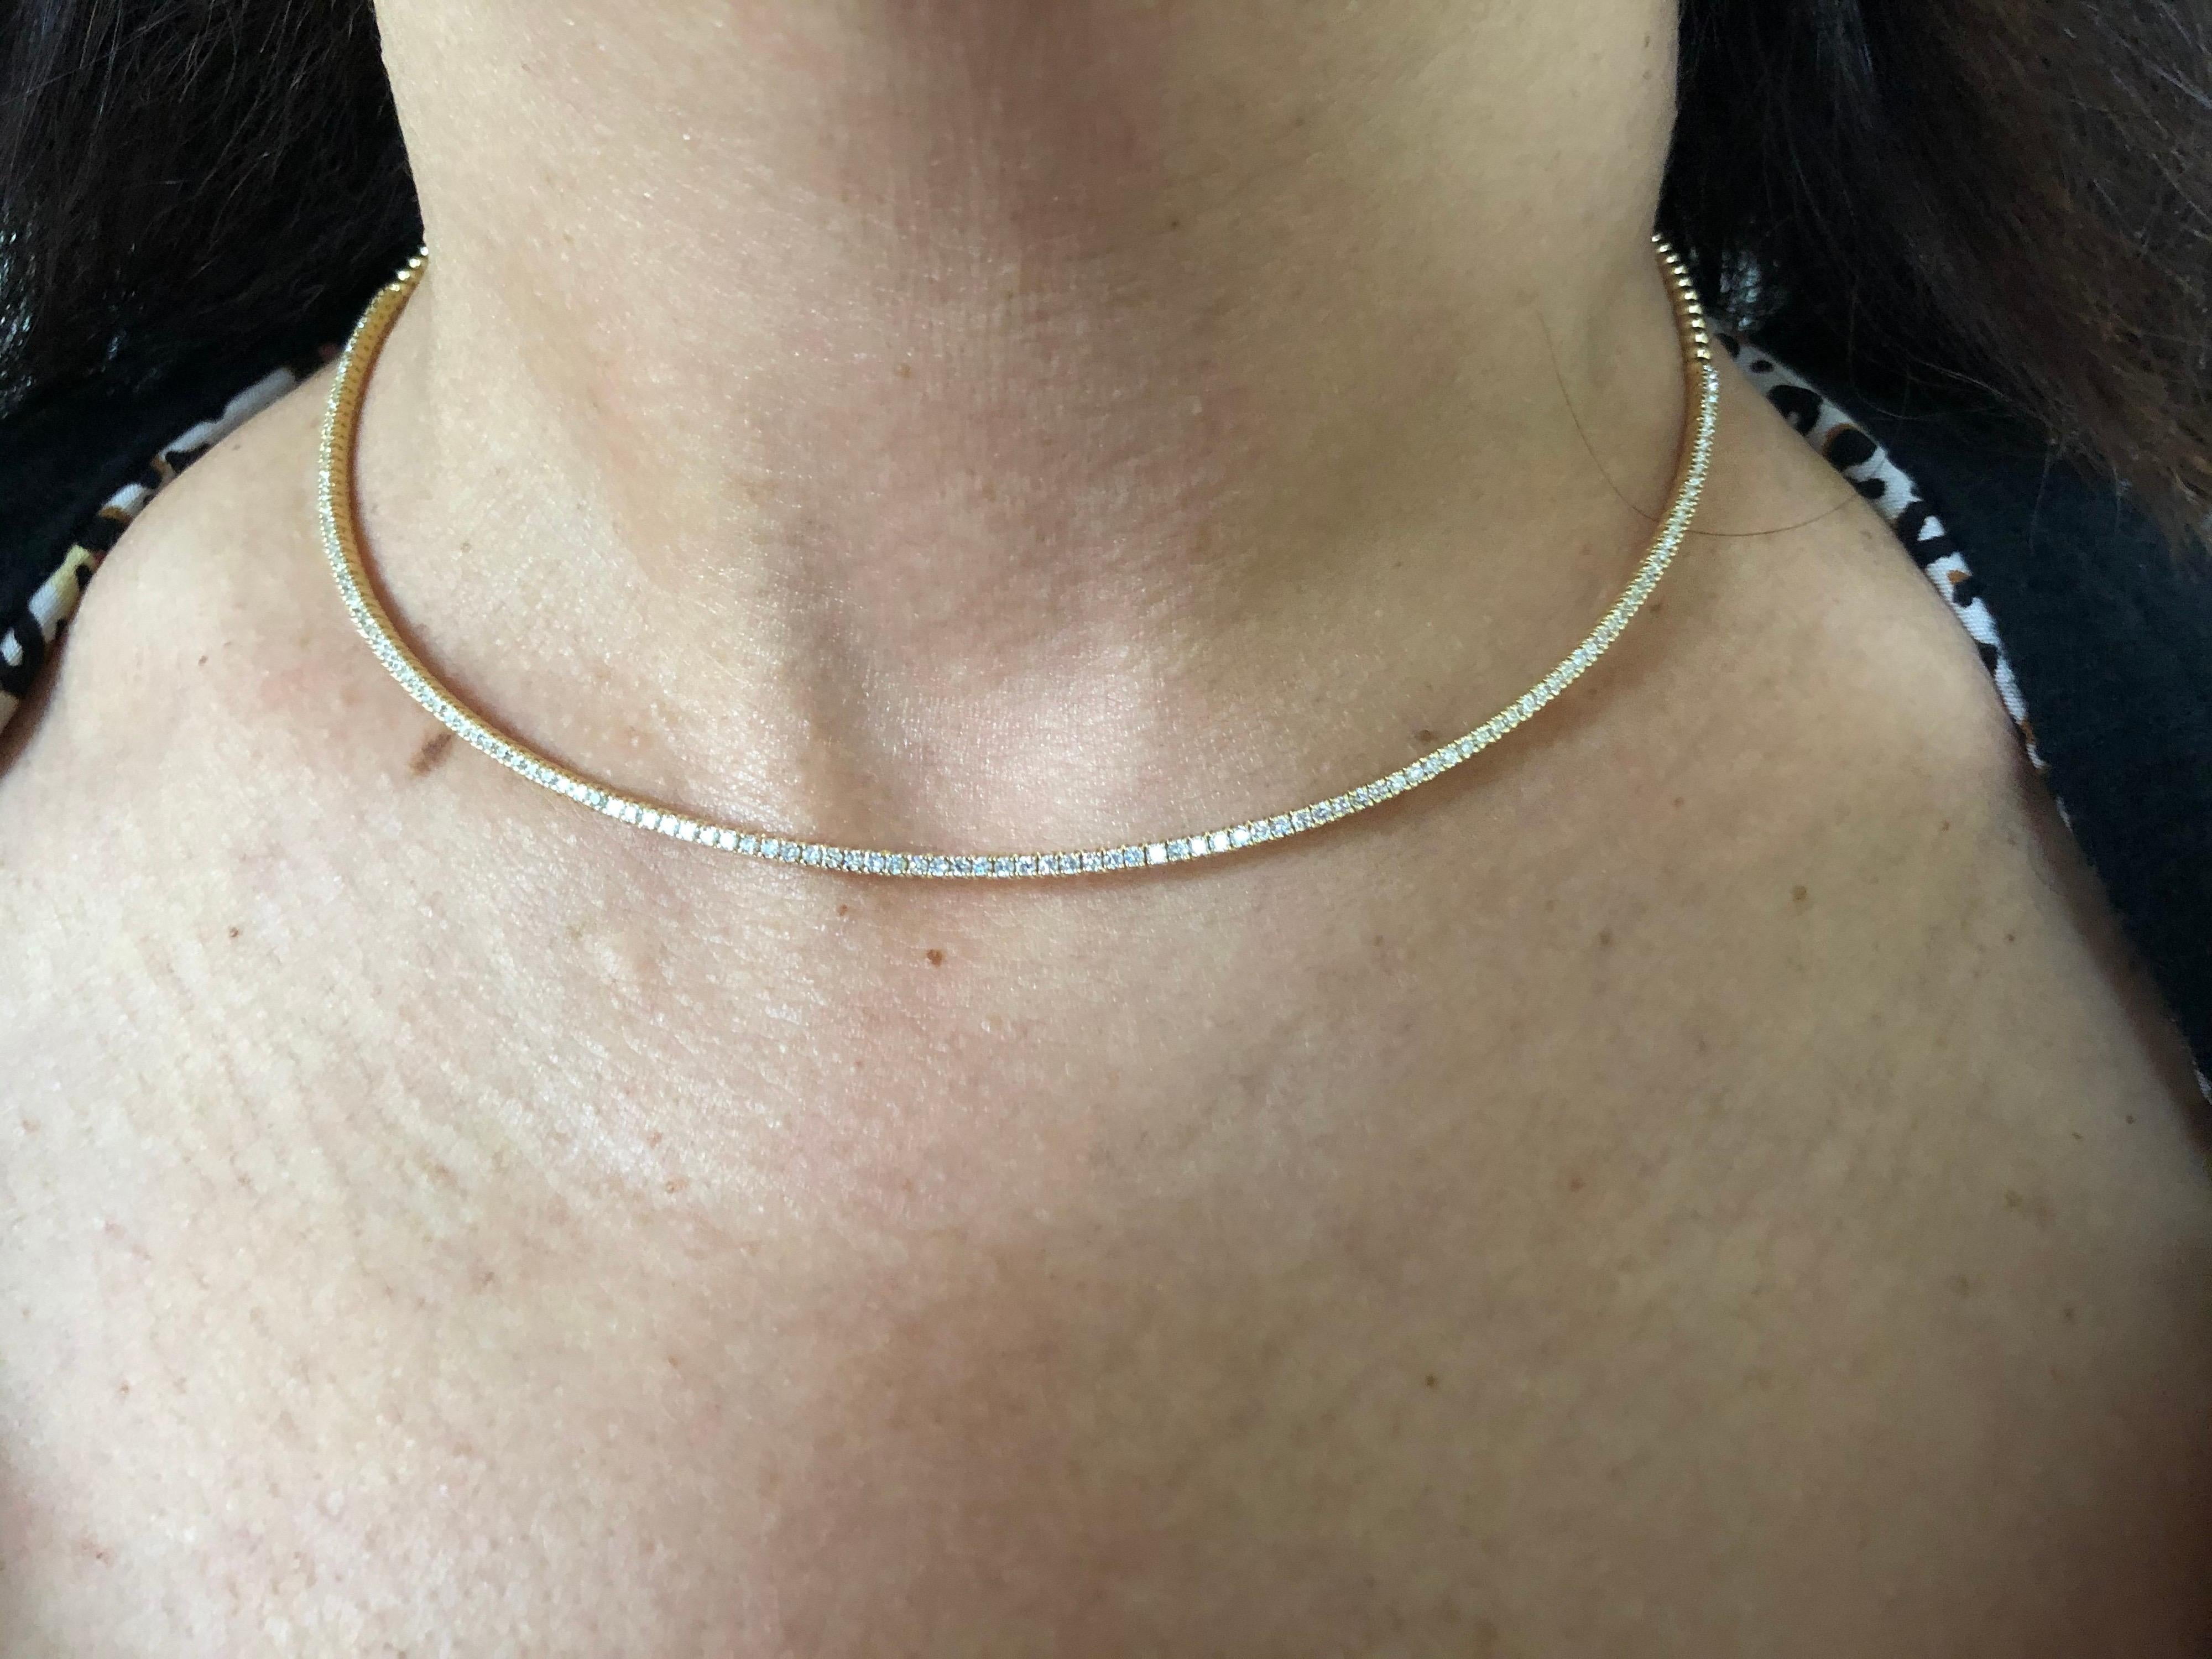 Choker necklace set in 18K yellow gold. The choker necklace is a rigid style and the diamonds are set half-way. The total carat weight of the necklace is 1.86 carats. The stones are G, the clarity is SI1-SI2. The necklace is available in white and